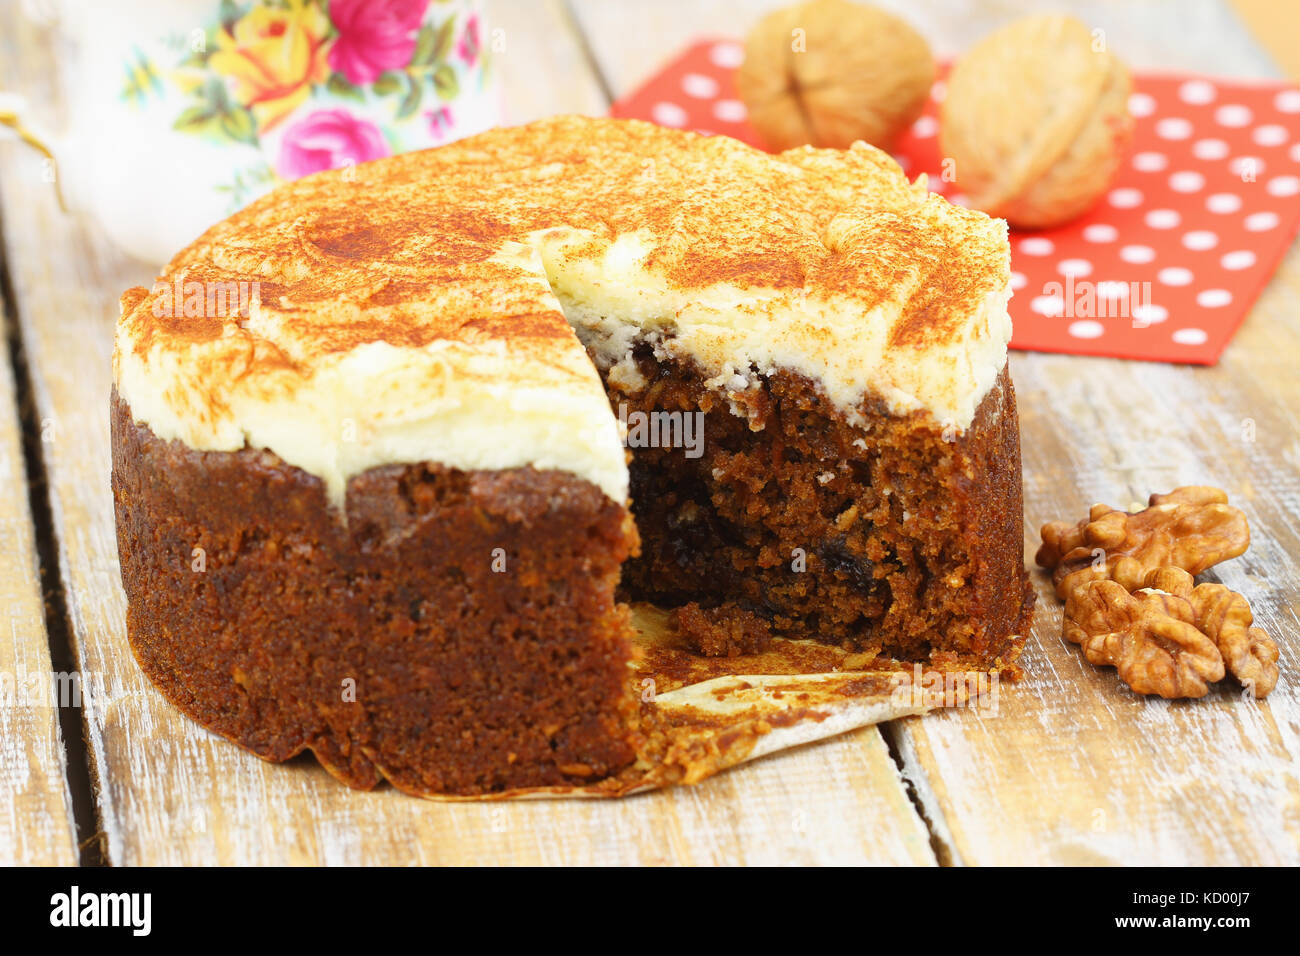 Delicious walnut and carrot cake with marzipan icing on rustic wooden surface Stock Photo